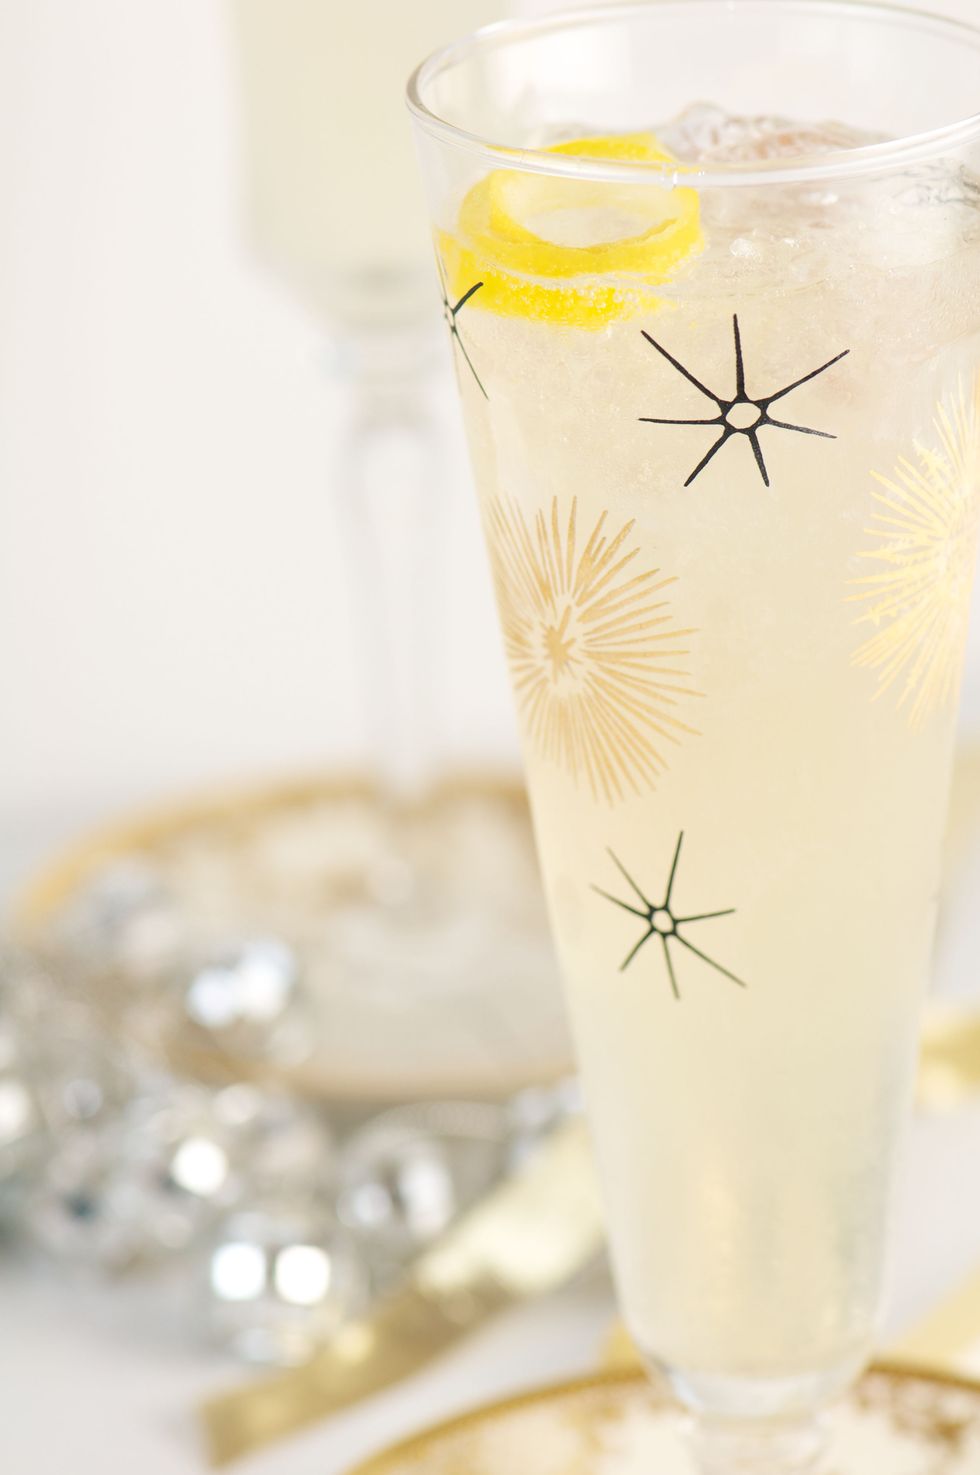 <p>A citrusy summer favorite. </p><p><strong>Ingredients: </strong></p><p>Bottle Santa Margherita Prosecco Superiore</p><p>1 cup Gin</p><p>¼ Freshly Squeezed Lemon Juice</p><p>2 tsp. Sugar</p><p>Lemon Spiral (garnish)</p><p><strong>Directions: </strong></p><p>Fill cocktail shaker with ice, gin, lemon juice, and sugar. Pour into champagne flute. Top with Santa Margherita Prosecco Superiore. Stir and garnish with lemon spiral.<br></p>